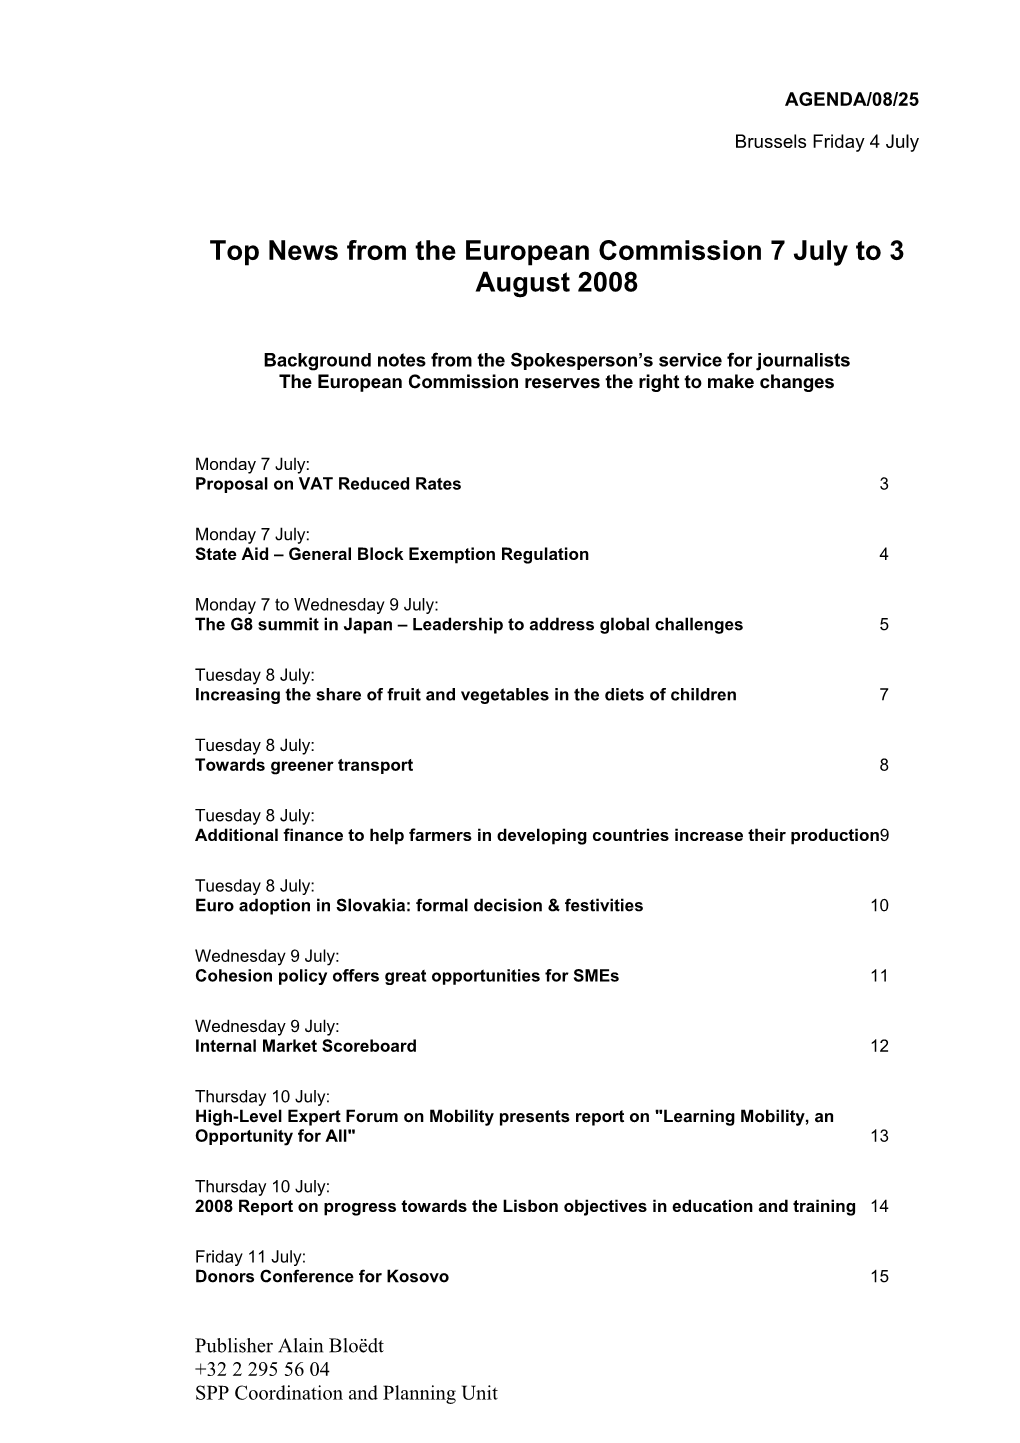 Top News from the European Commission 7 July to 3 August 2008